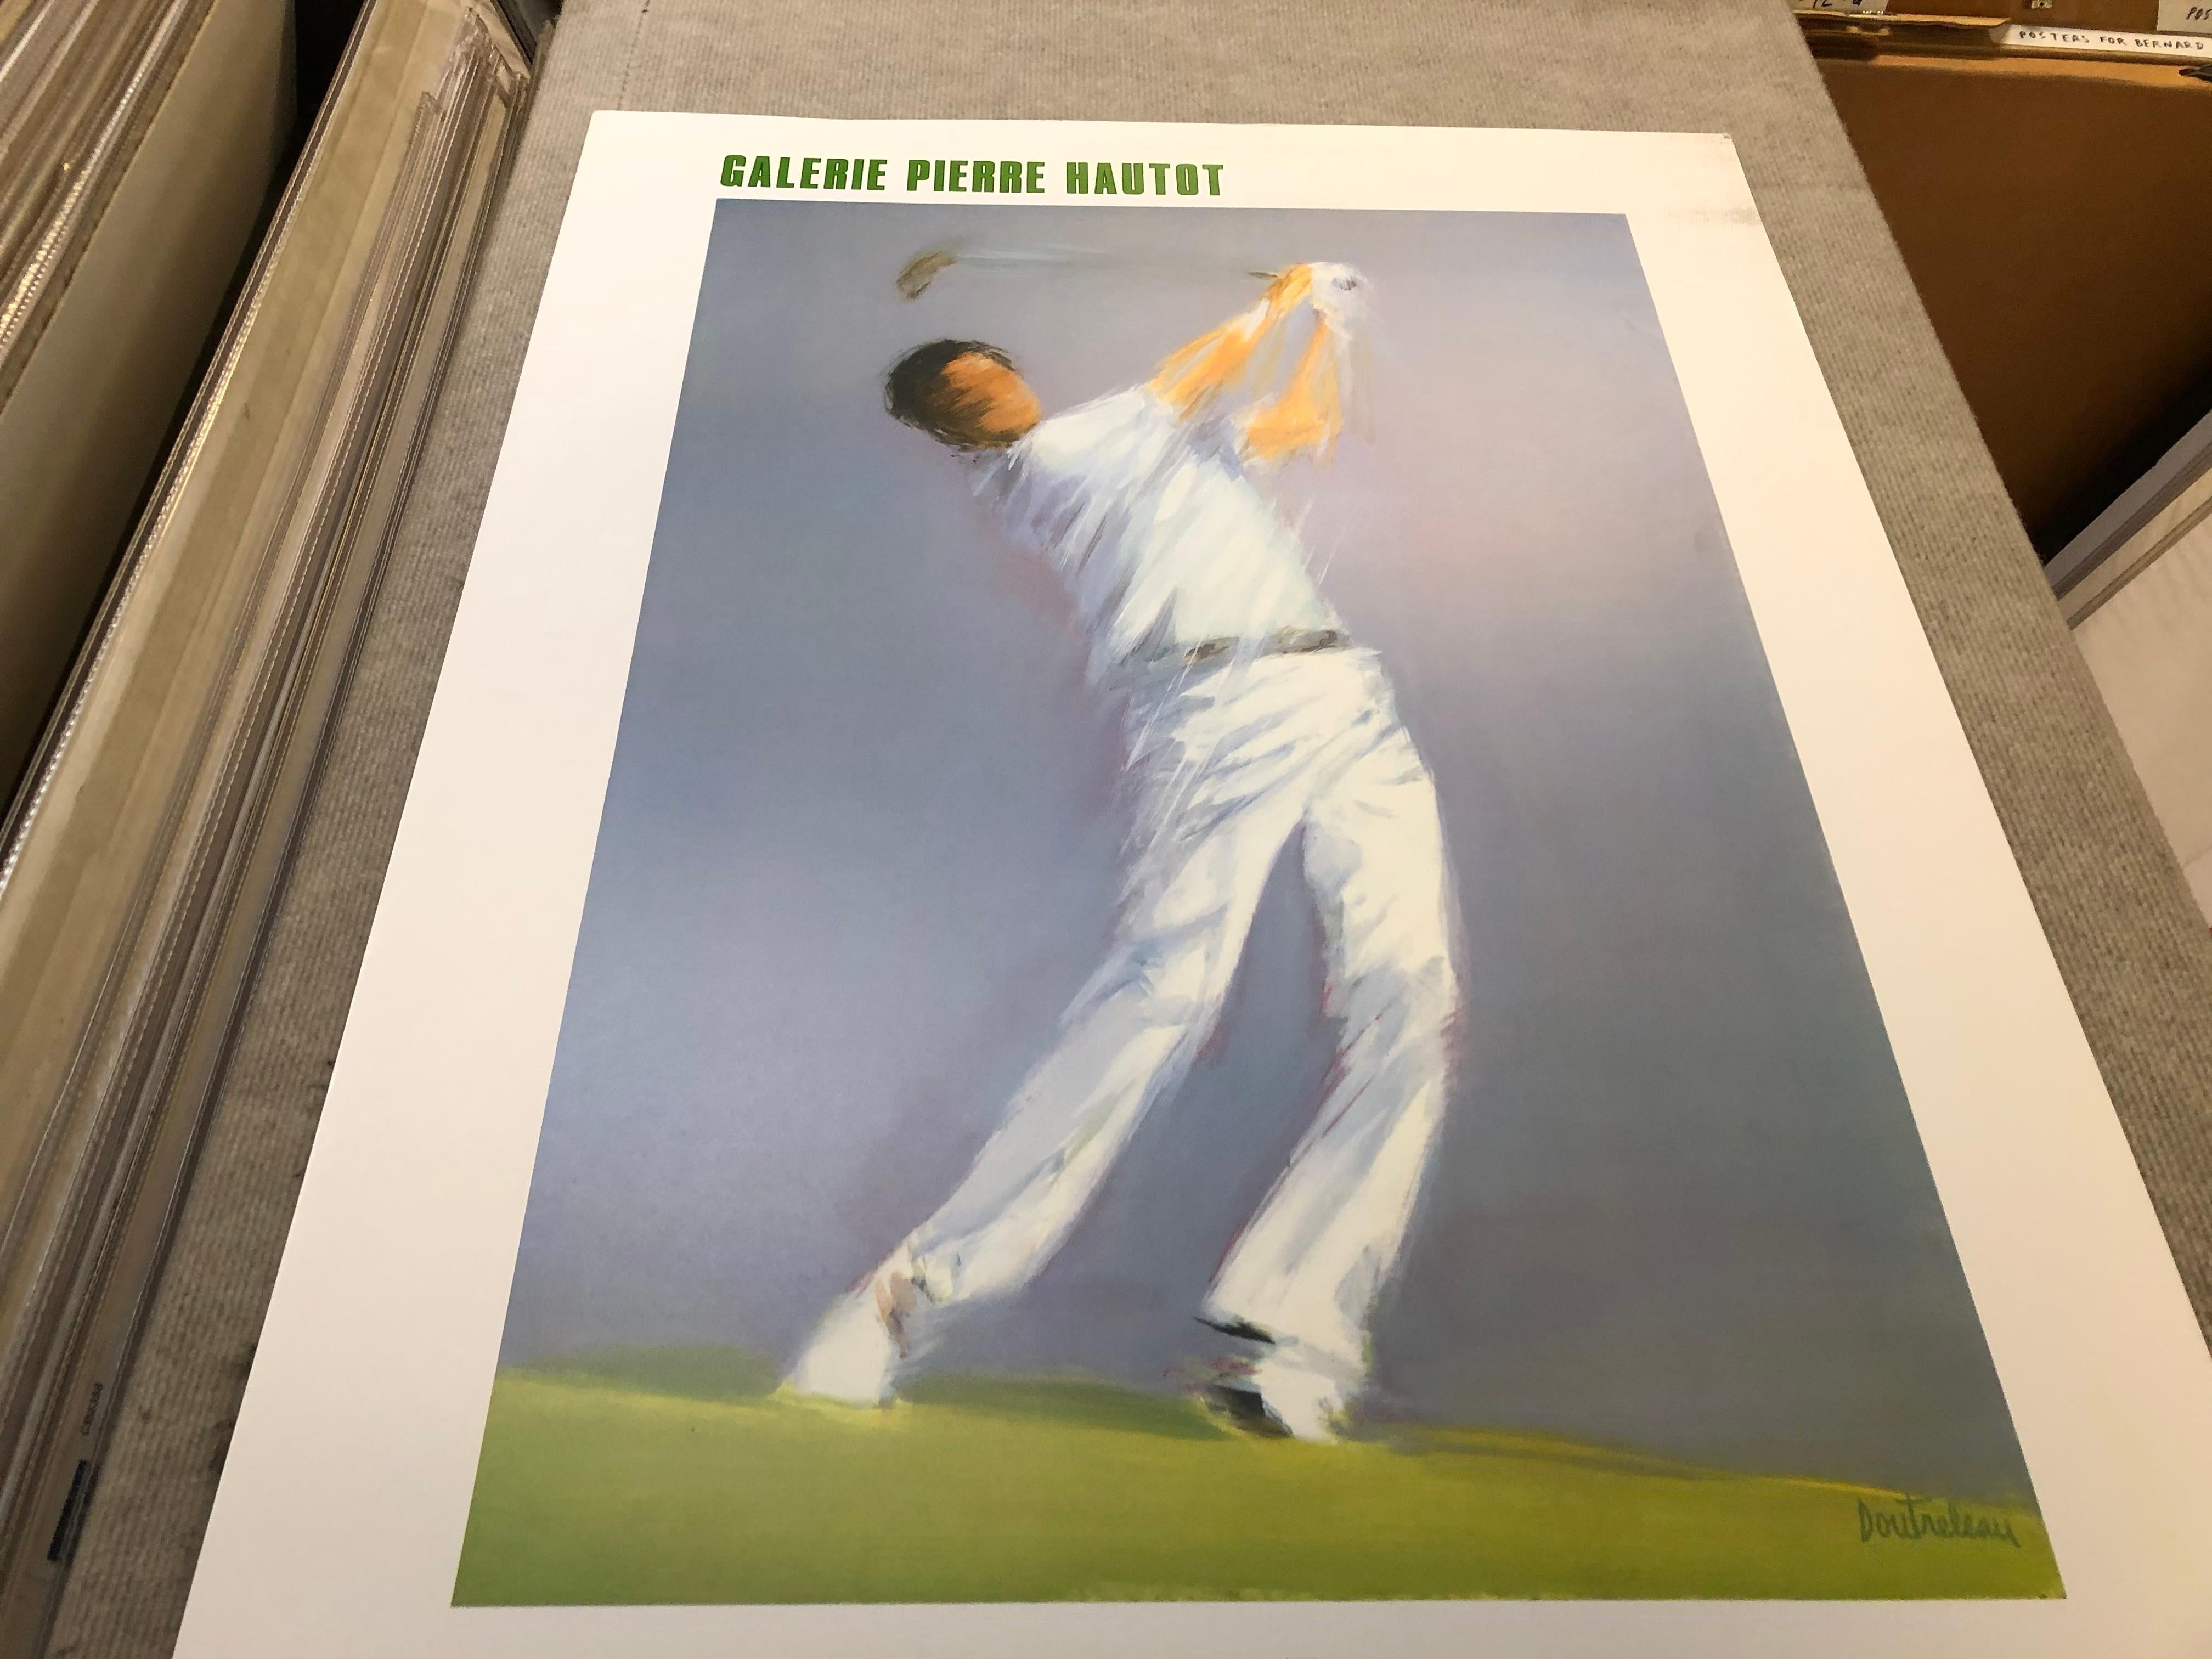 1986 After Pierre Doutreleau 'Golf Player' Contemporary Gray, White France Offset 7